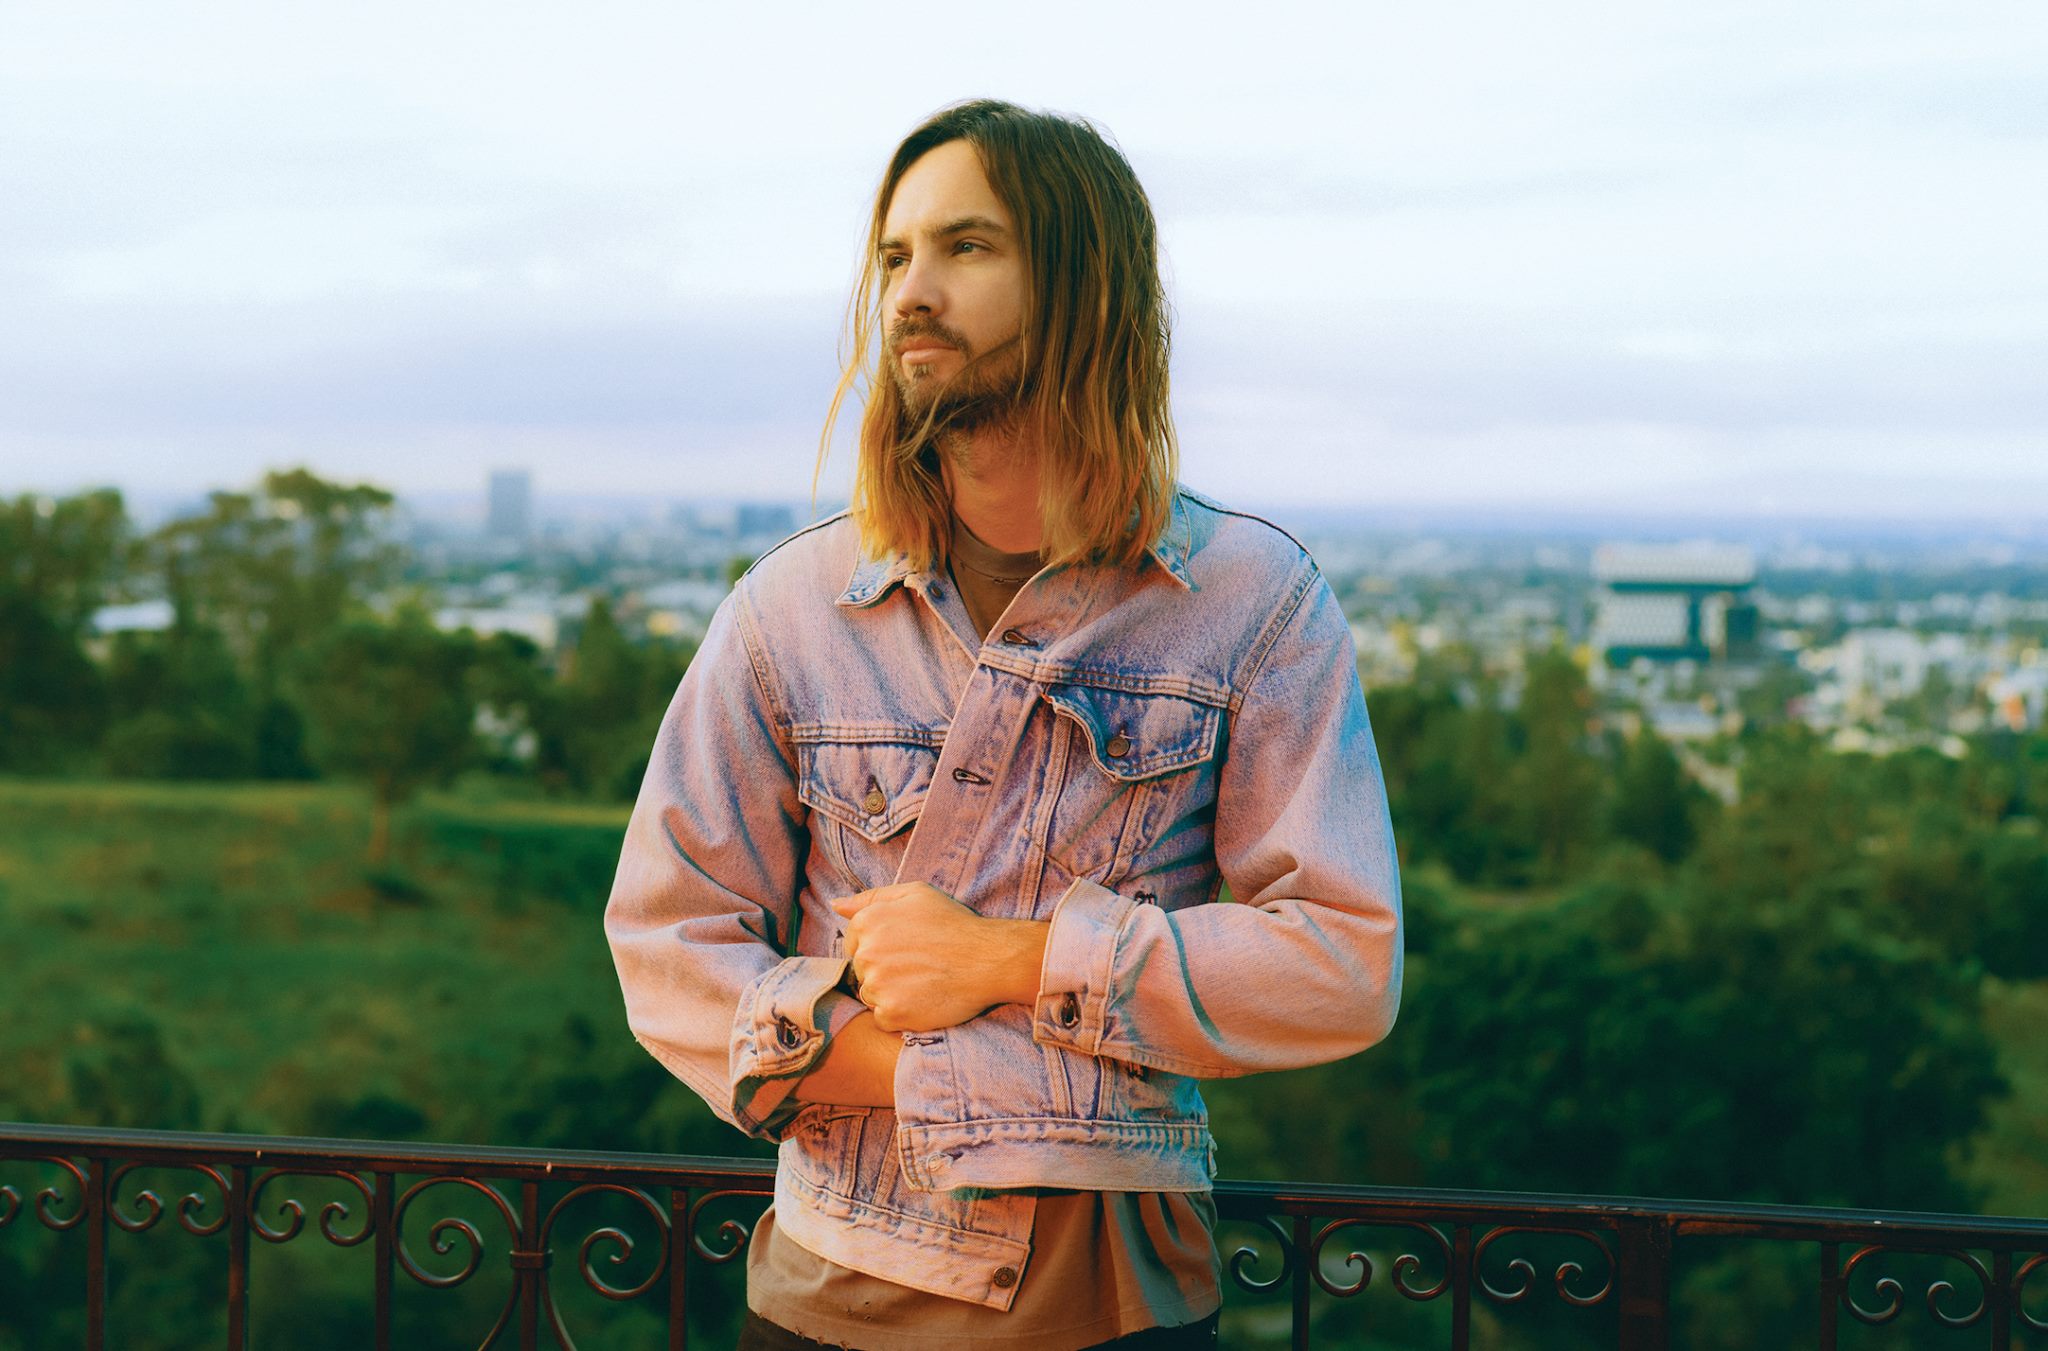 Sales for new Tame Impala signal high debut in major markets